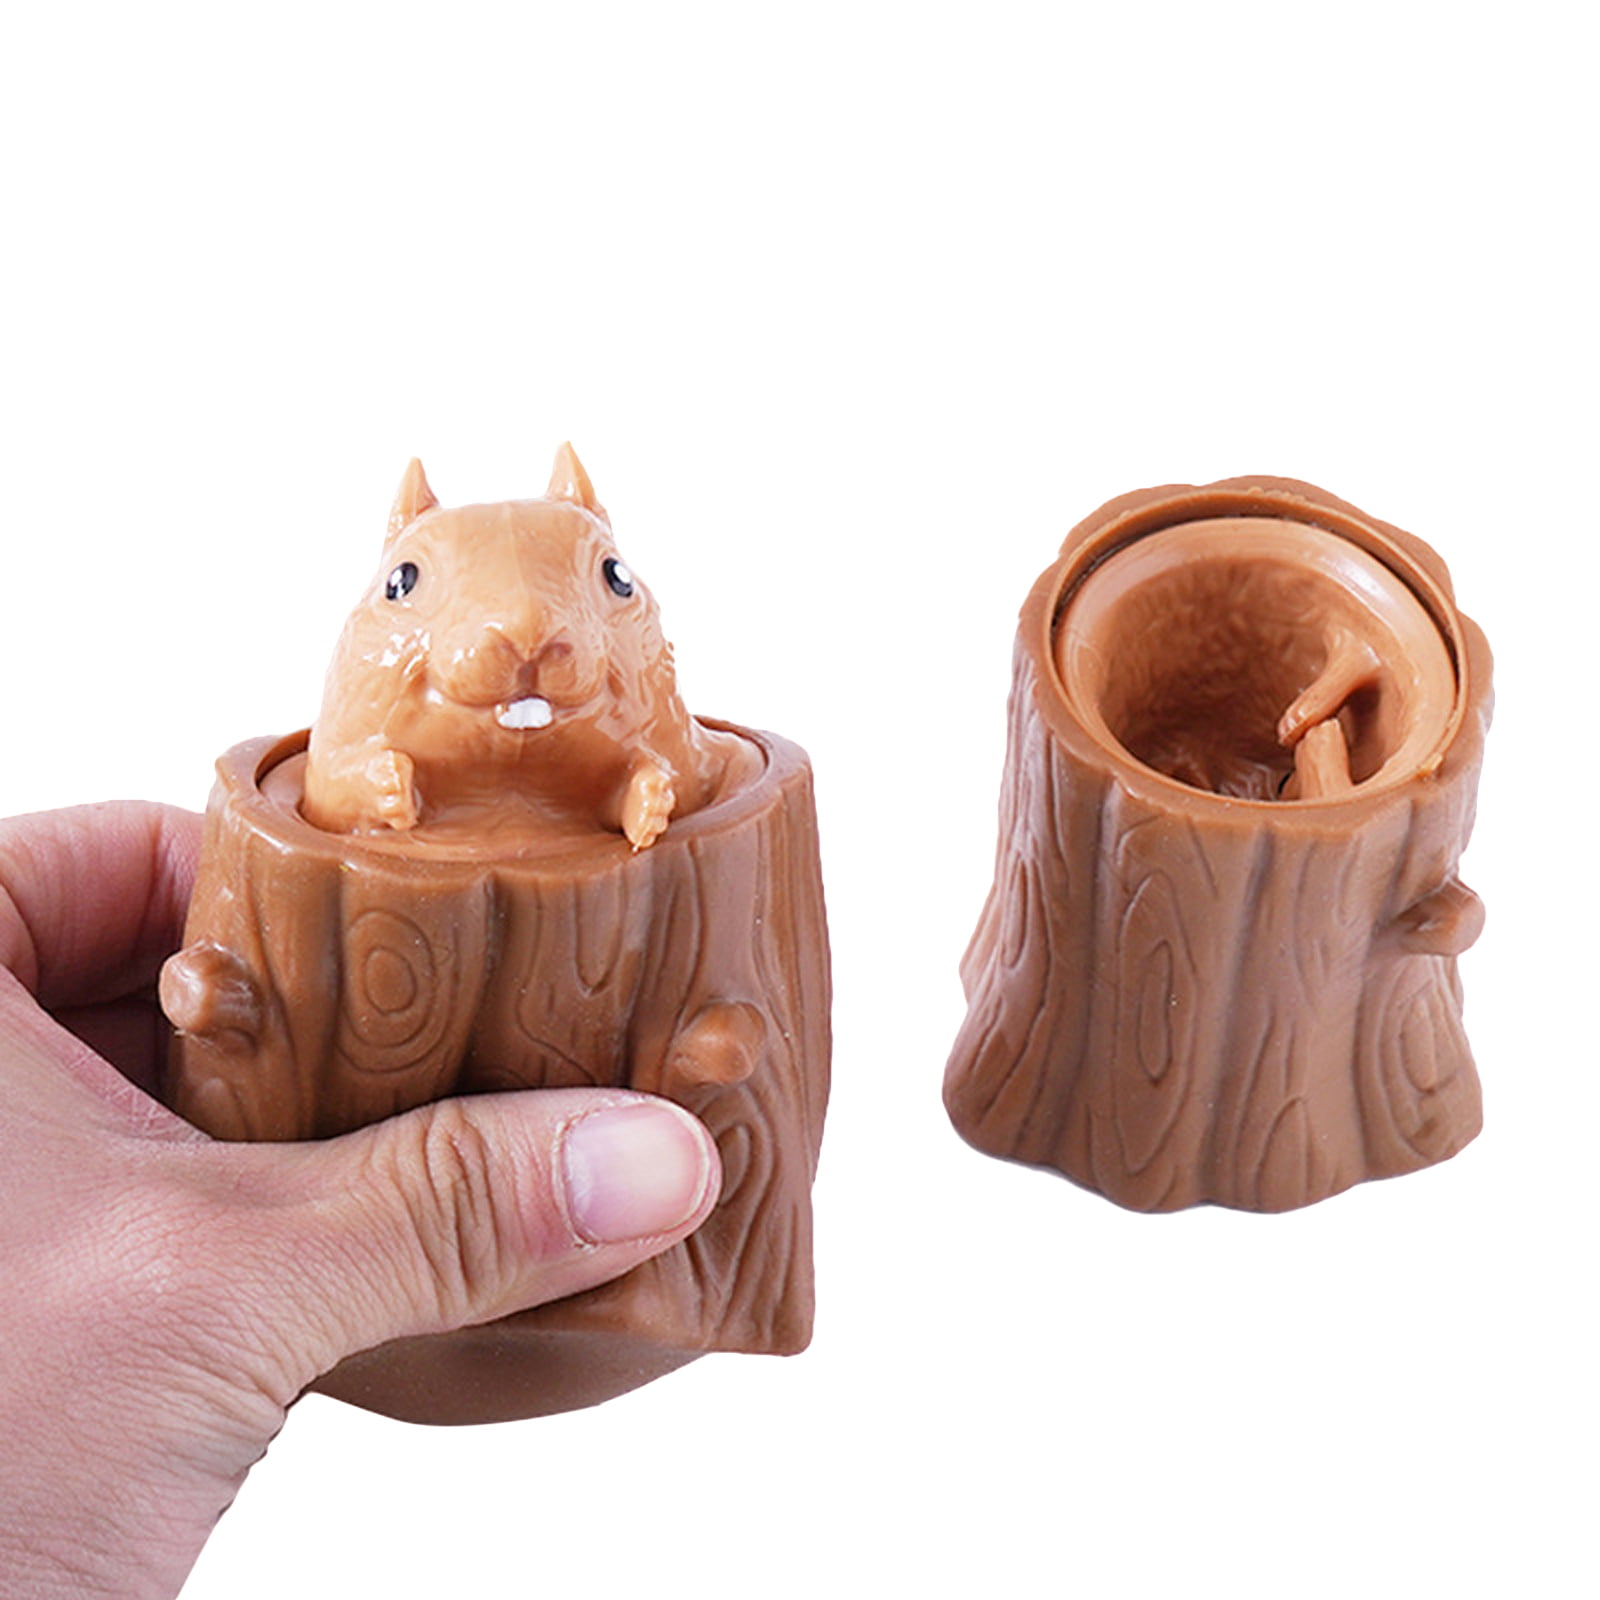 Simulation Squirrel Pen Holder Cup Toy OLOPE Decompression Squirrel Cup Pen Holder Squeezing Toy 2 PC 